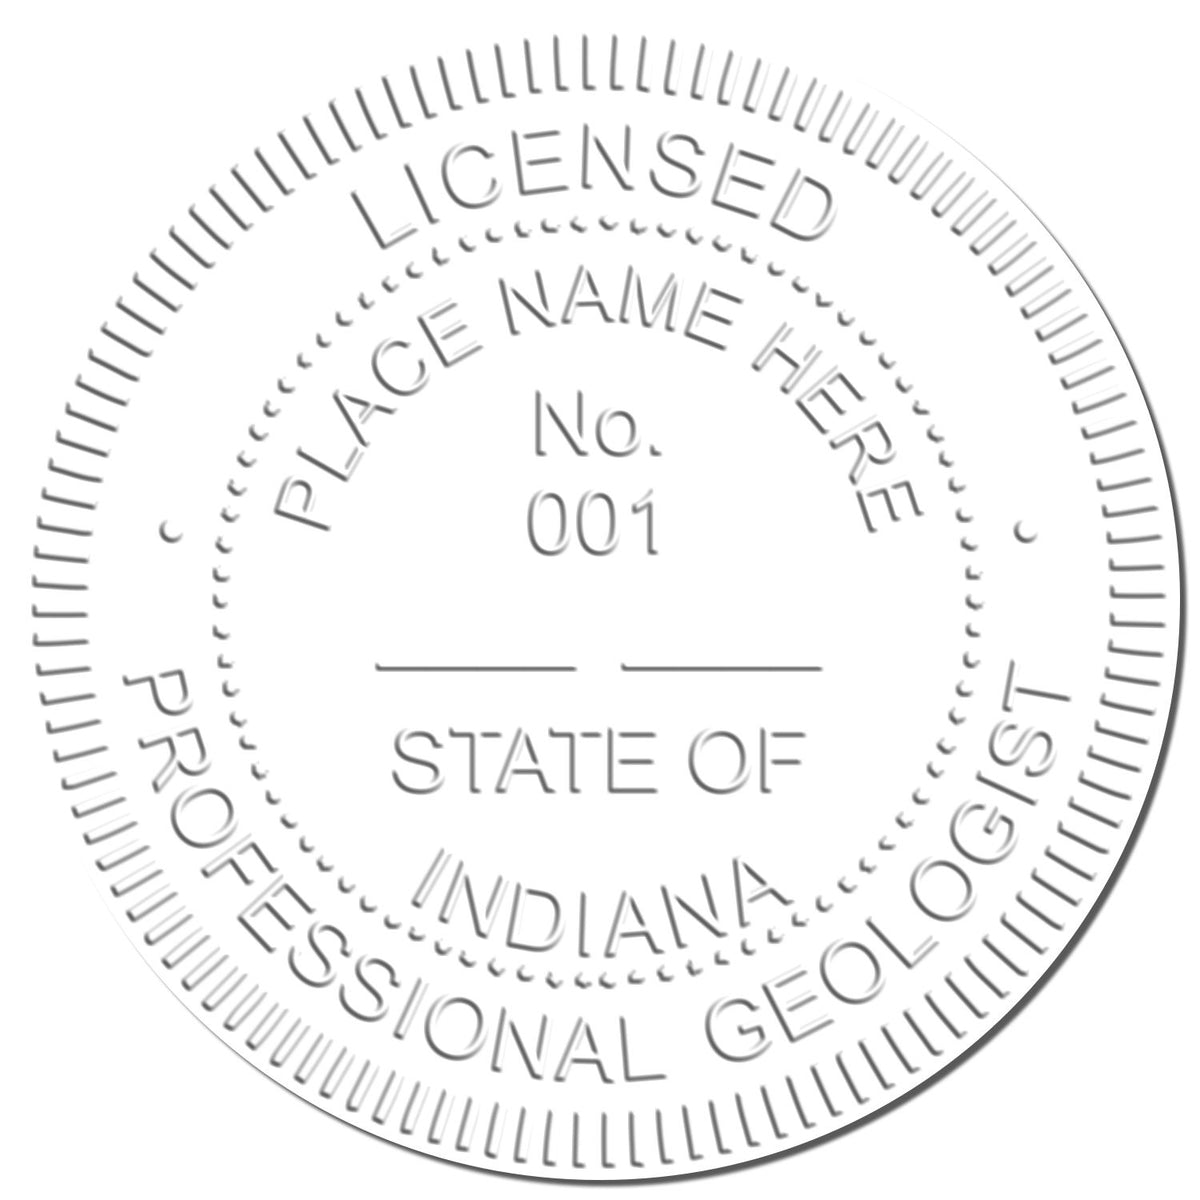 A photograph of the Hybrid Indiana Geologist Seal stamp impression reveals a vivid, professional image of the on paper.